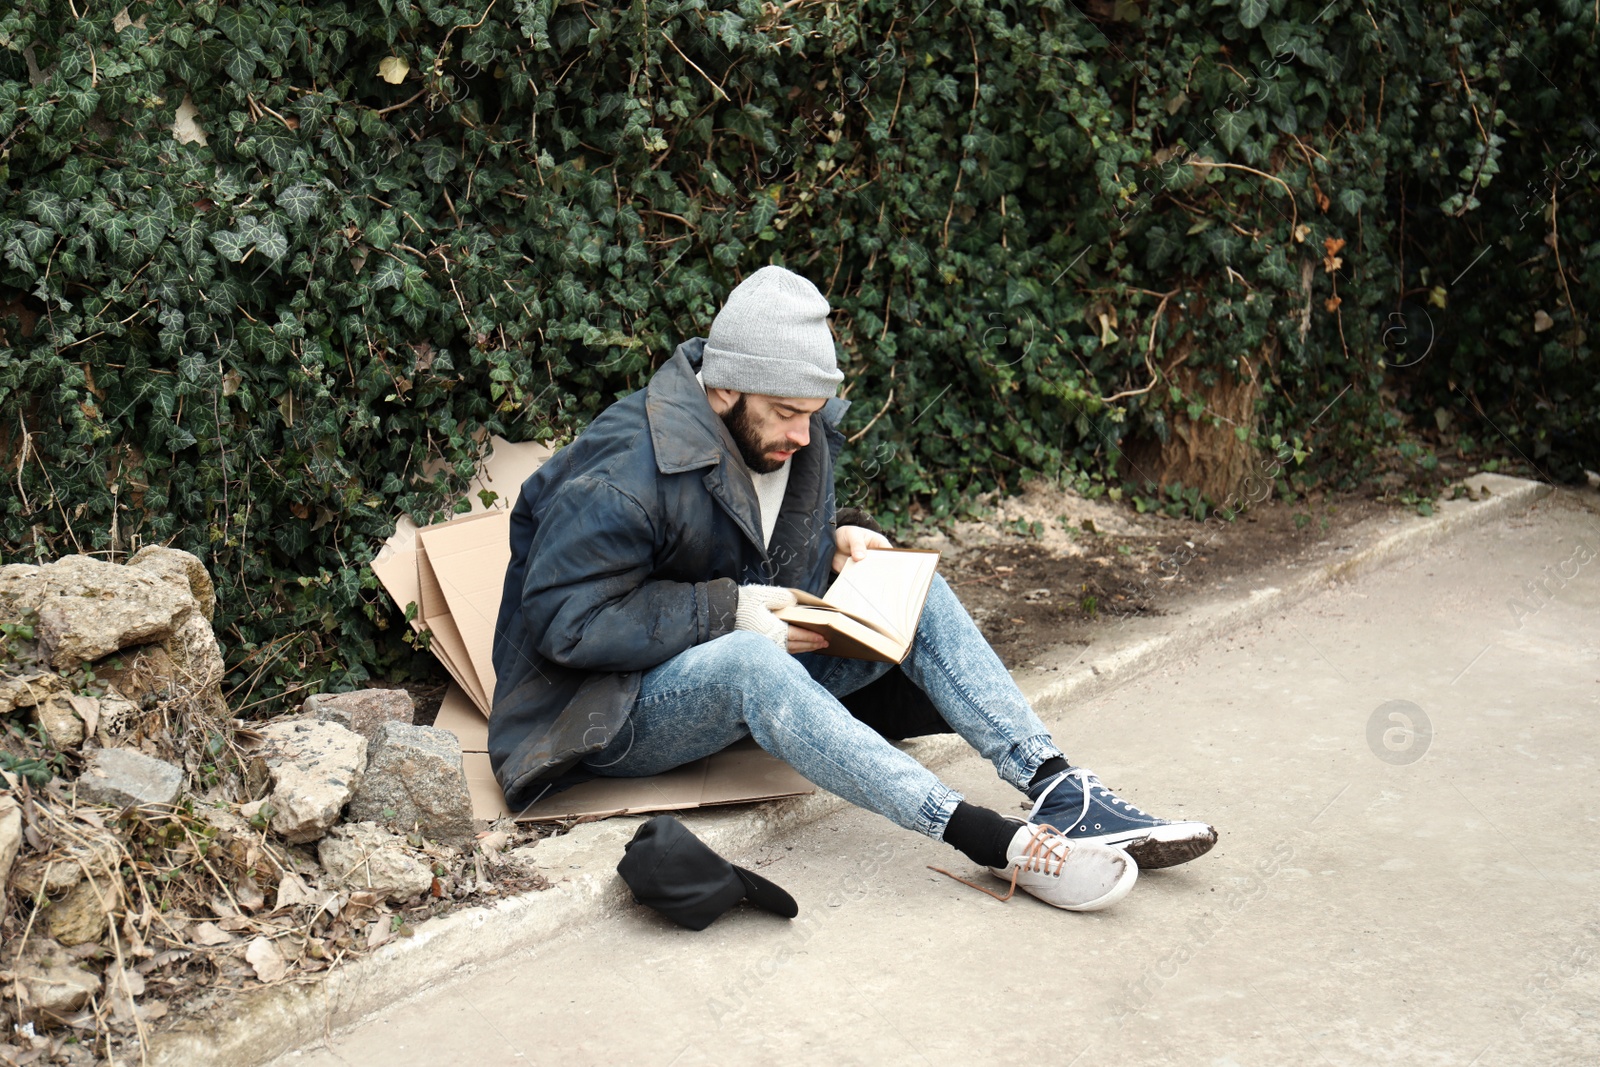 Photo of Poor homeless man with book on street in city